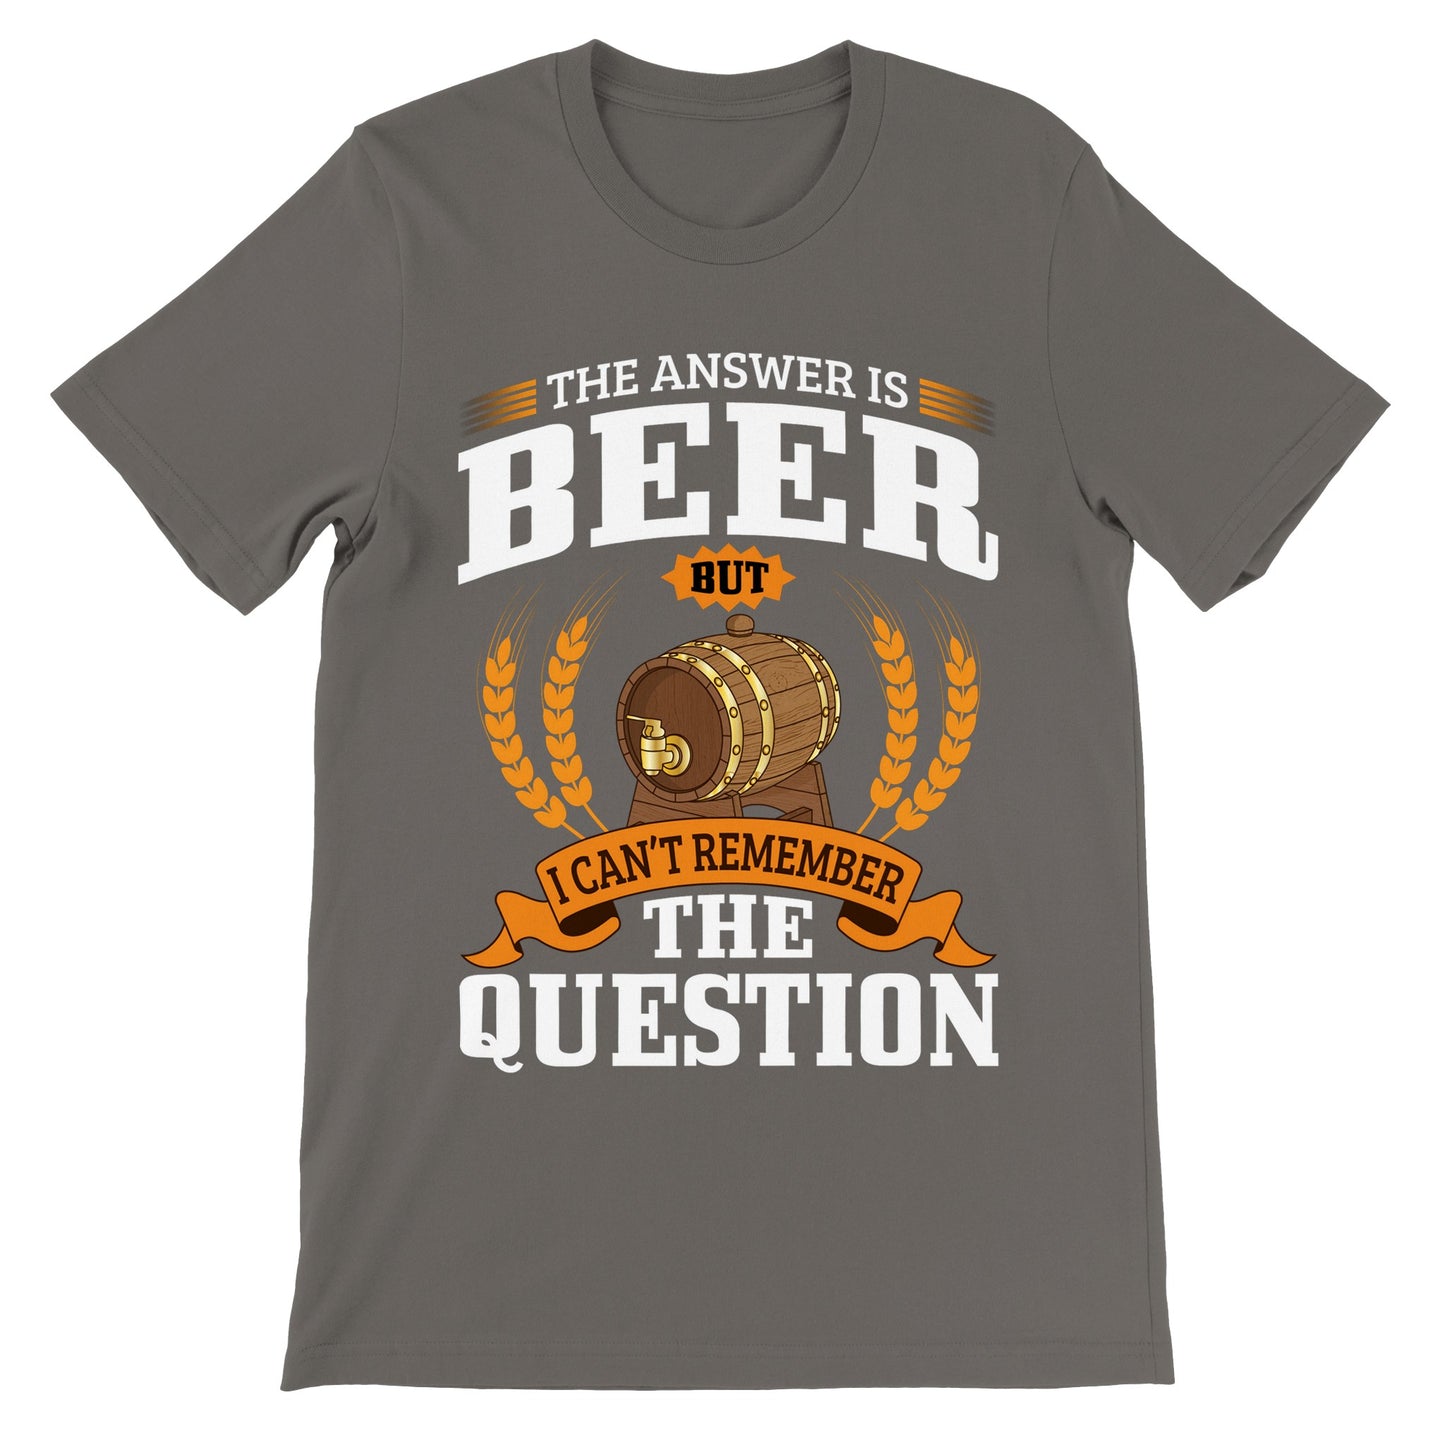 Funny T-shirts - The Answer is Beer But - Premium Unisex T-shirt 